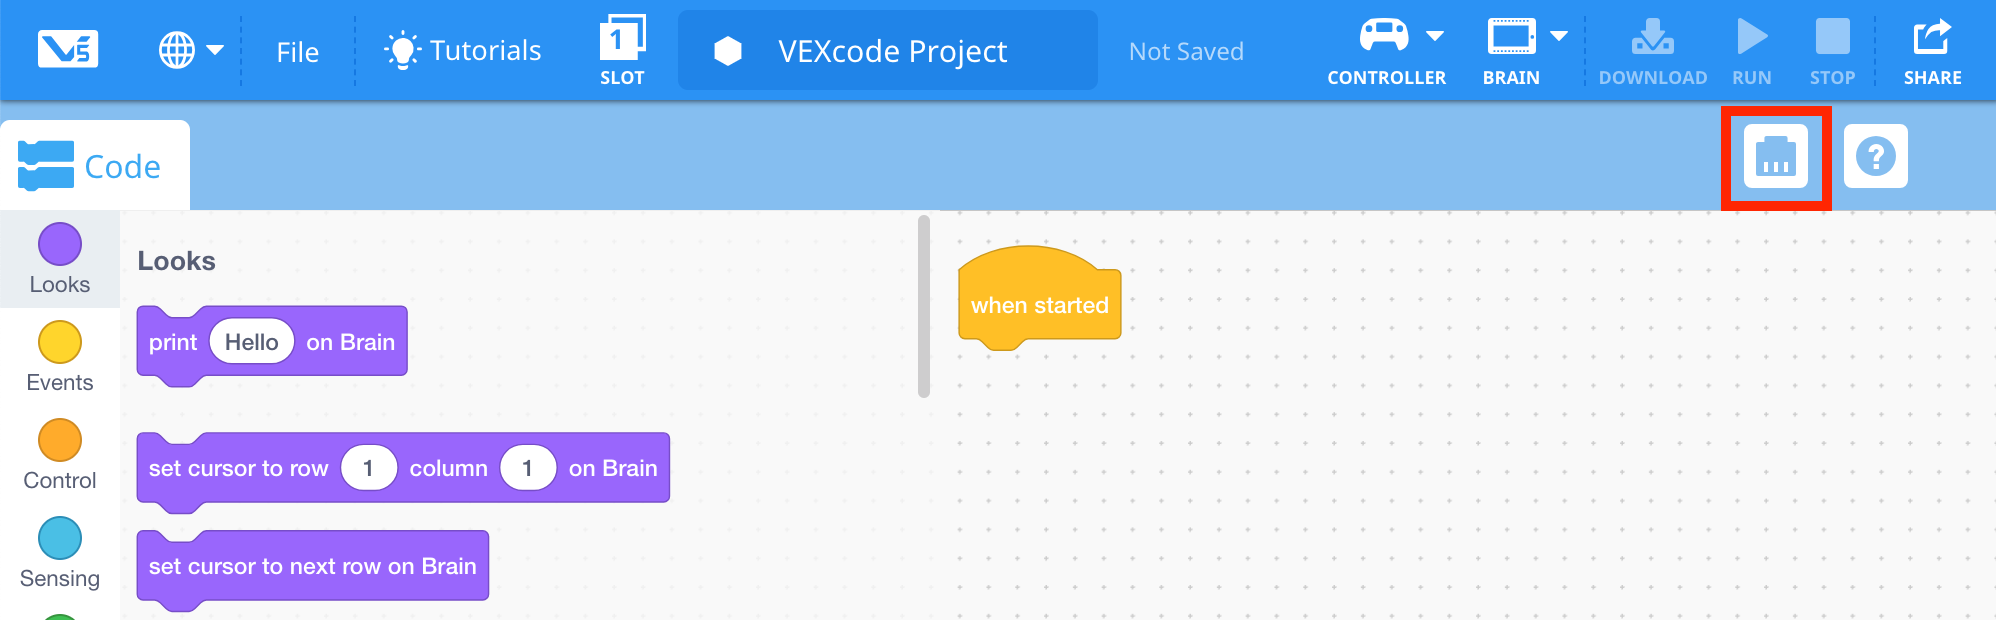 How can I code an X-drive - VEXcode Pro V5 Text Tech Support - VEX Forum